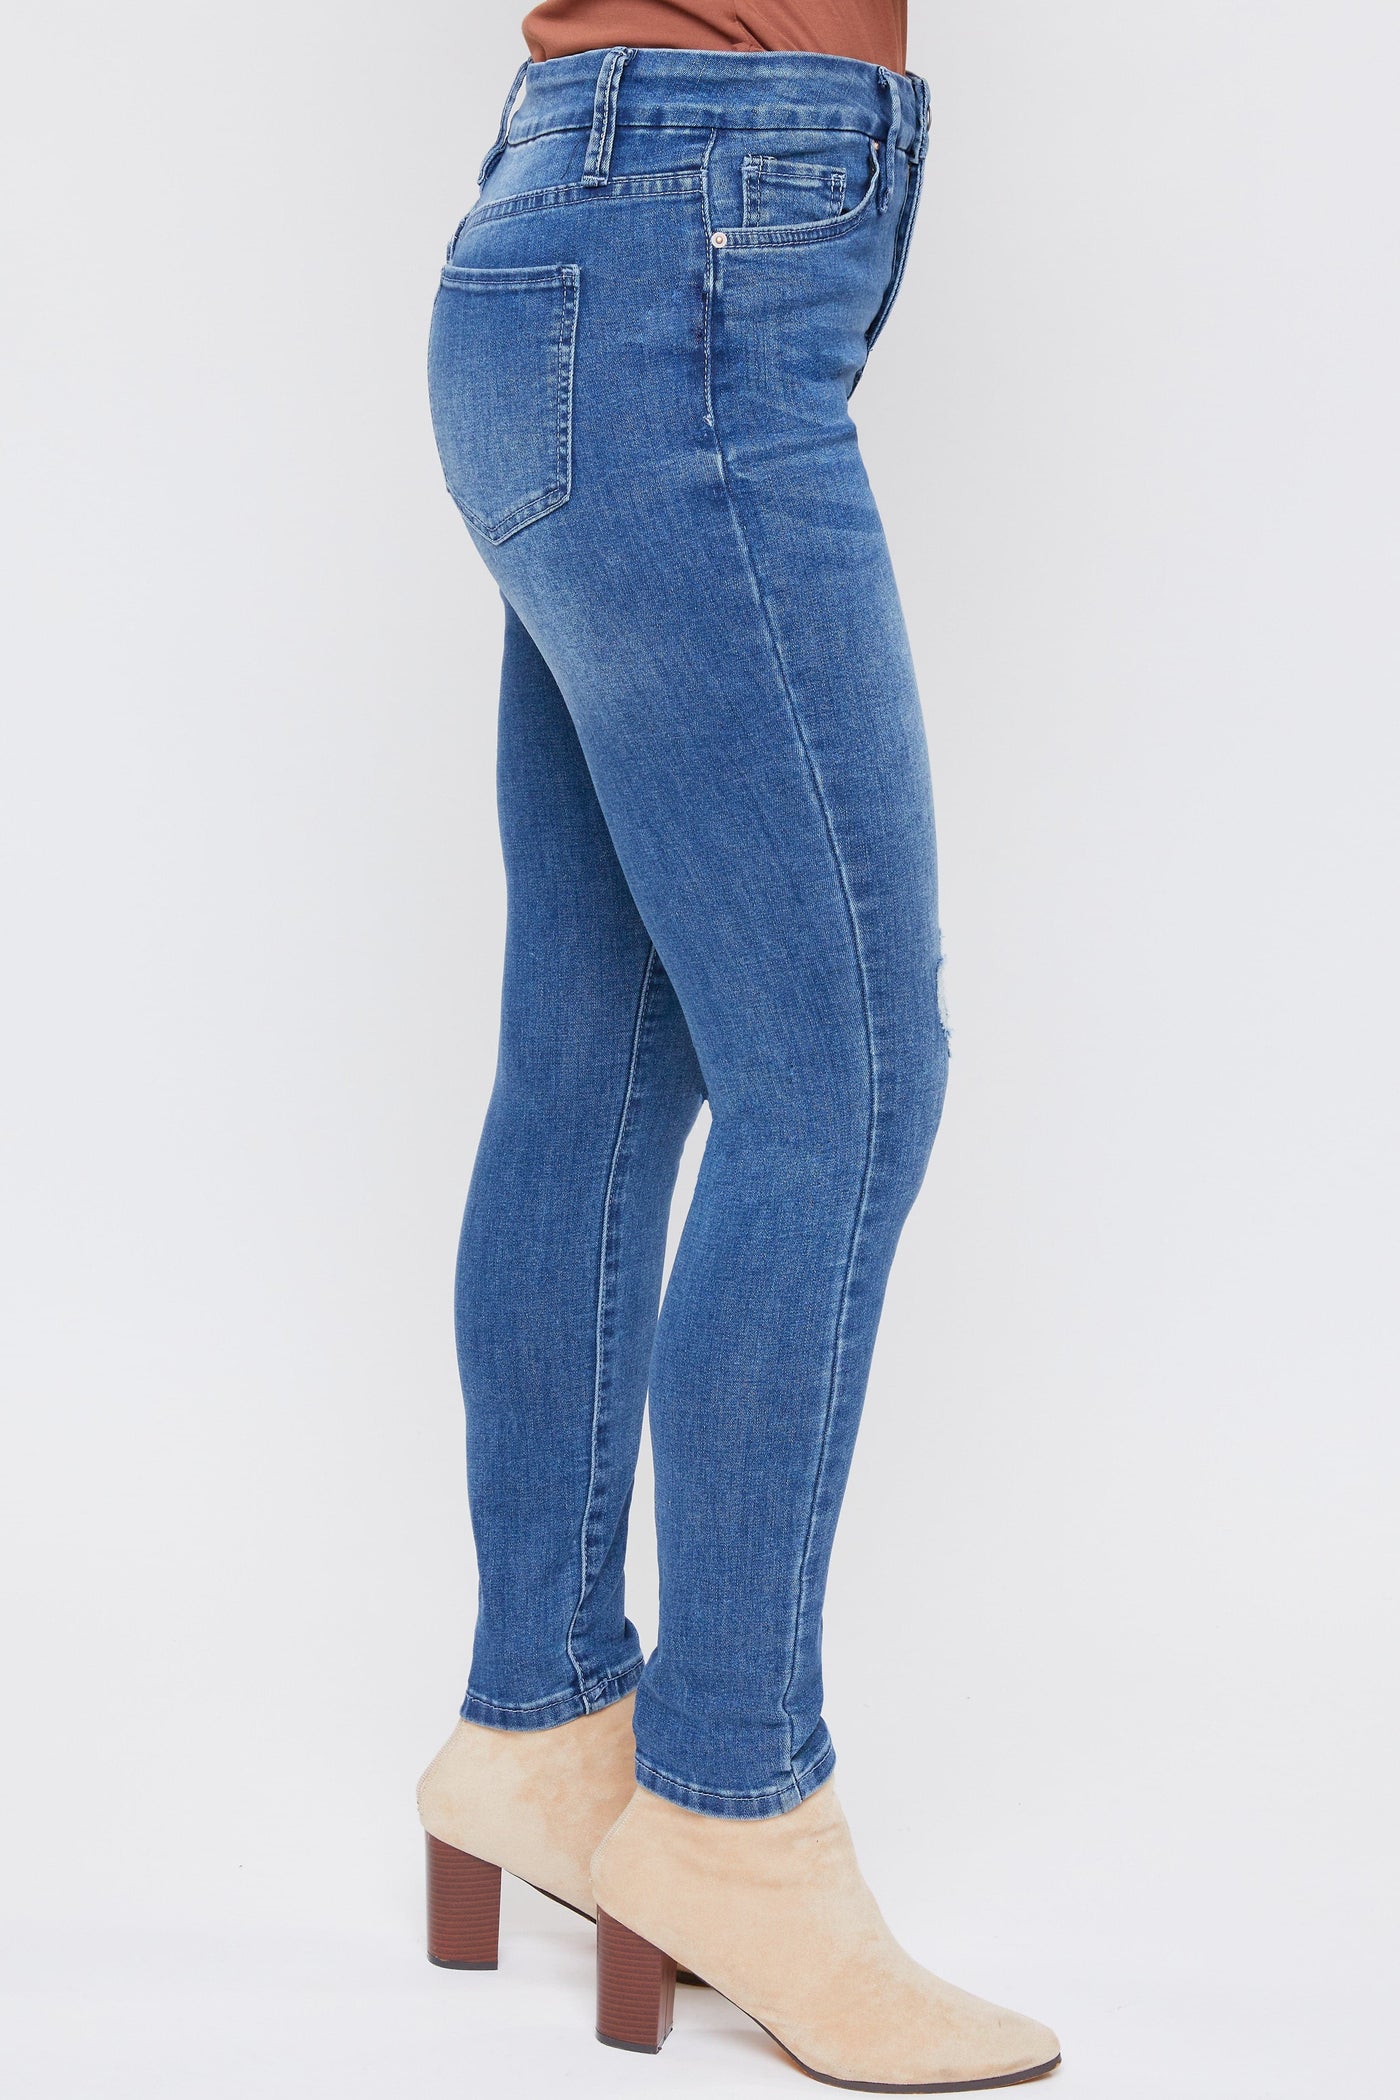 Ladies Skinny Jeans, Button, High Rise at Rs 425/piece in Mumbai